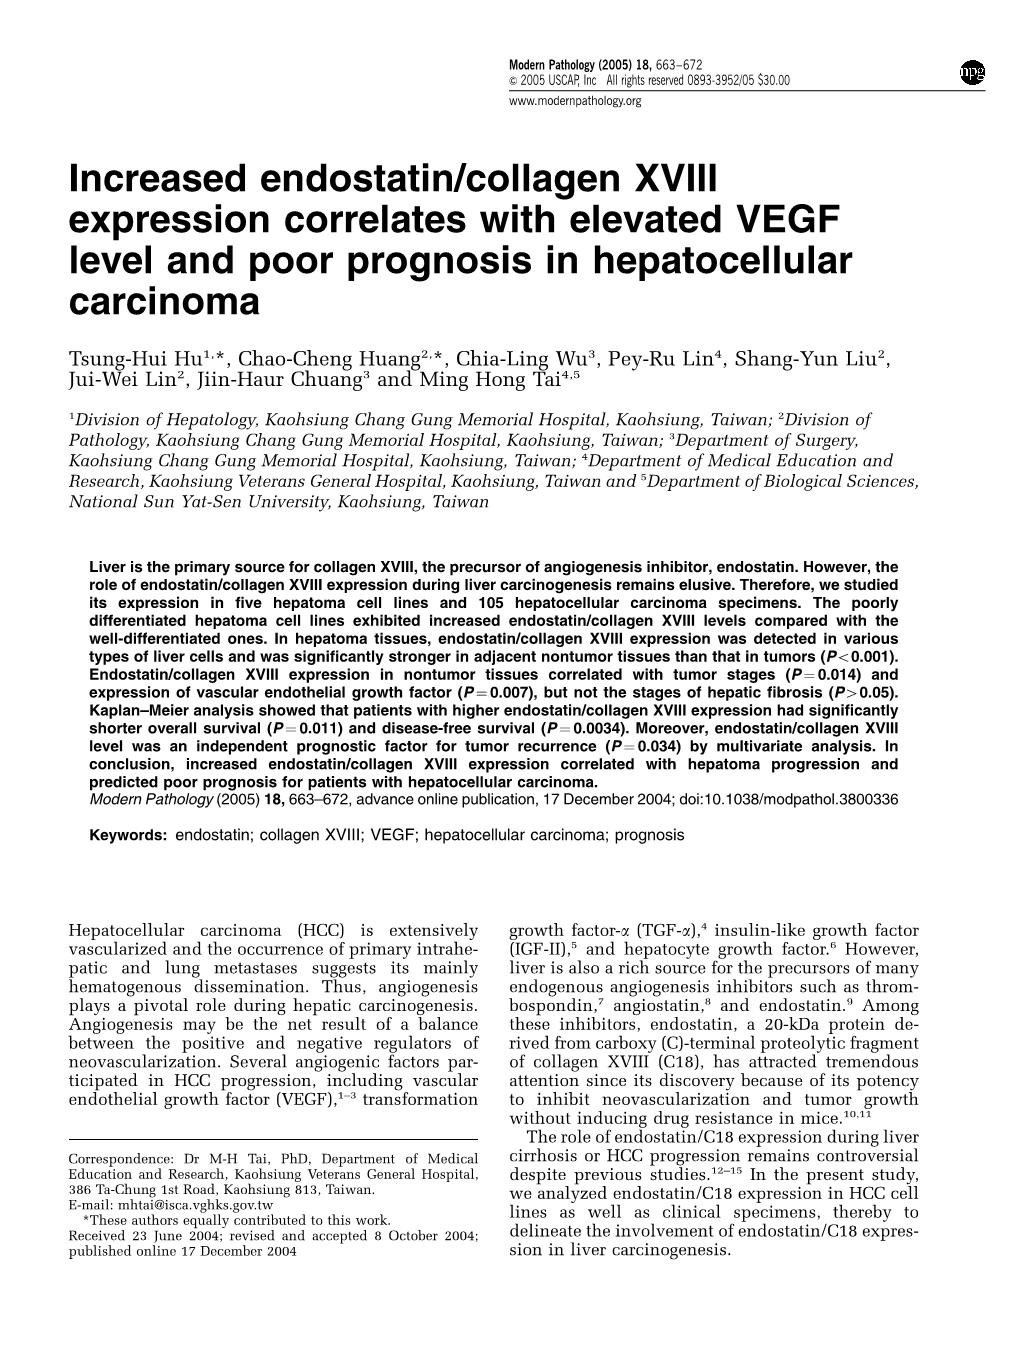 Increased Endostatin/Collagen XVIII Expression Correlates with Elevated VEGF Level and Poor Prognosis in Hepatocellular Carcinoma